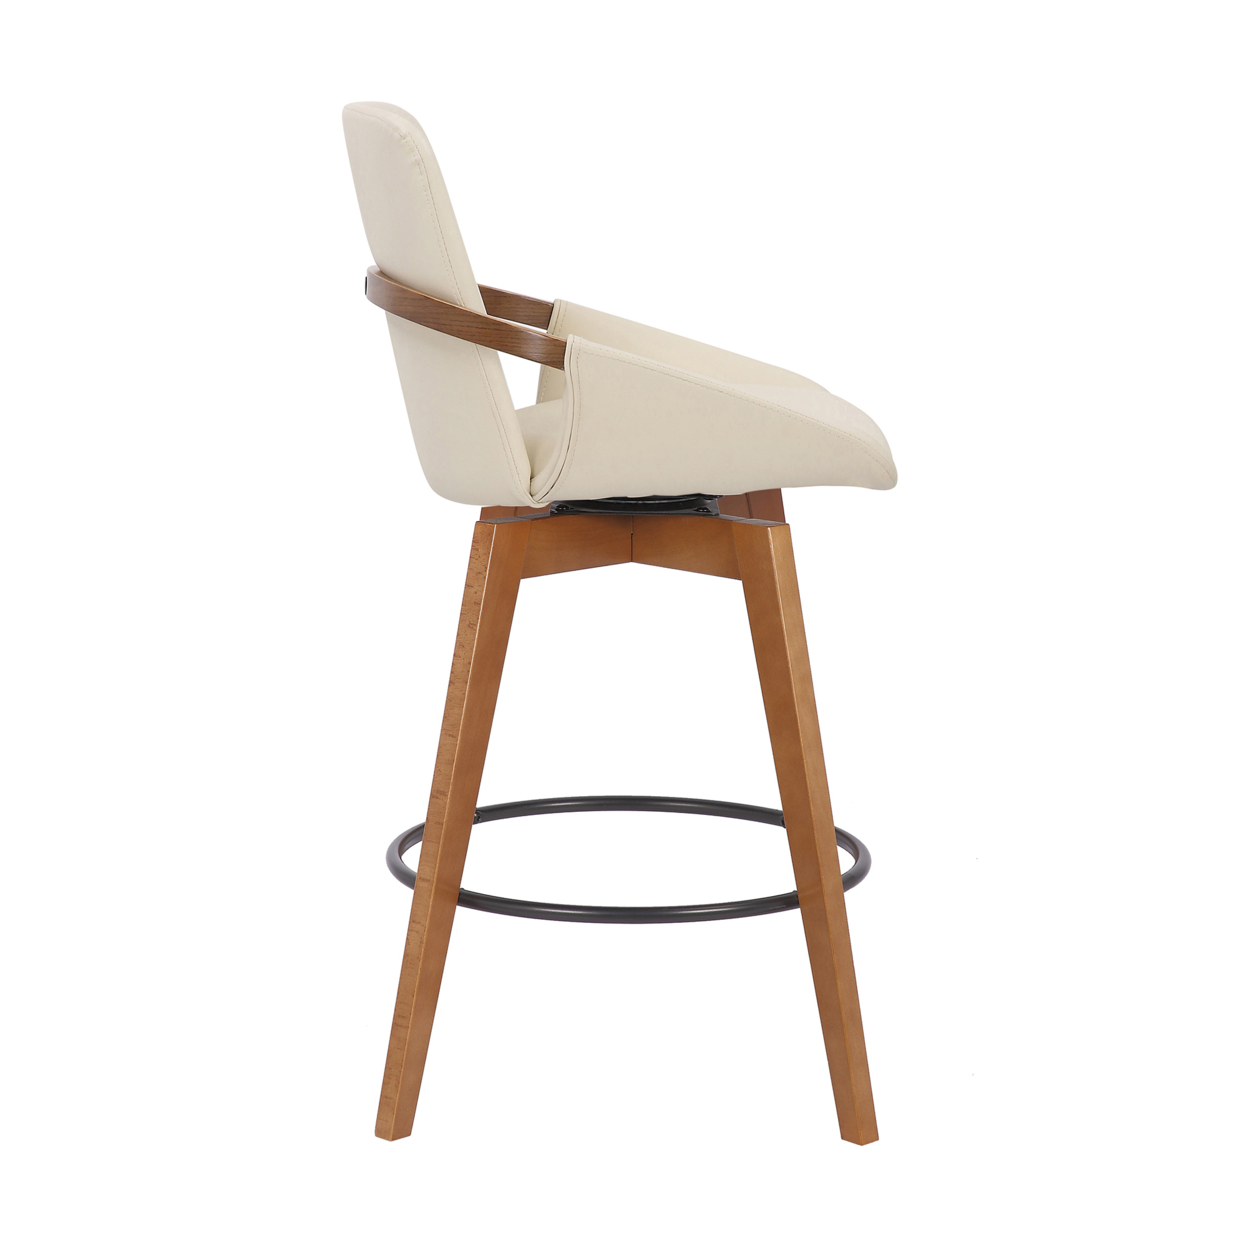 27 Inches Leatherette Swivel Counter Stool, Cream And Brown- Saltoro Sherpi